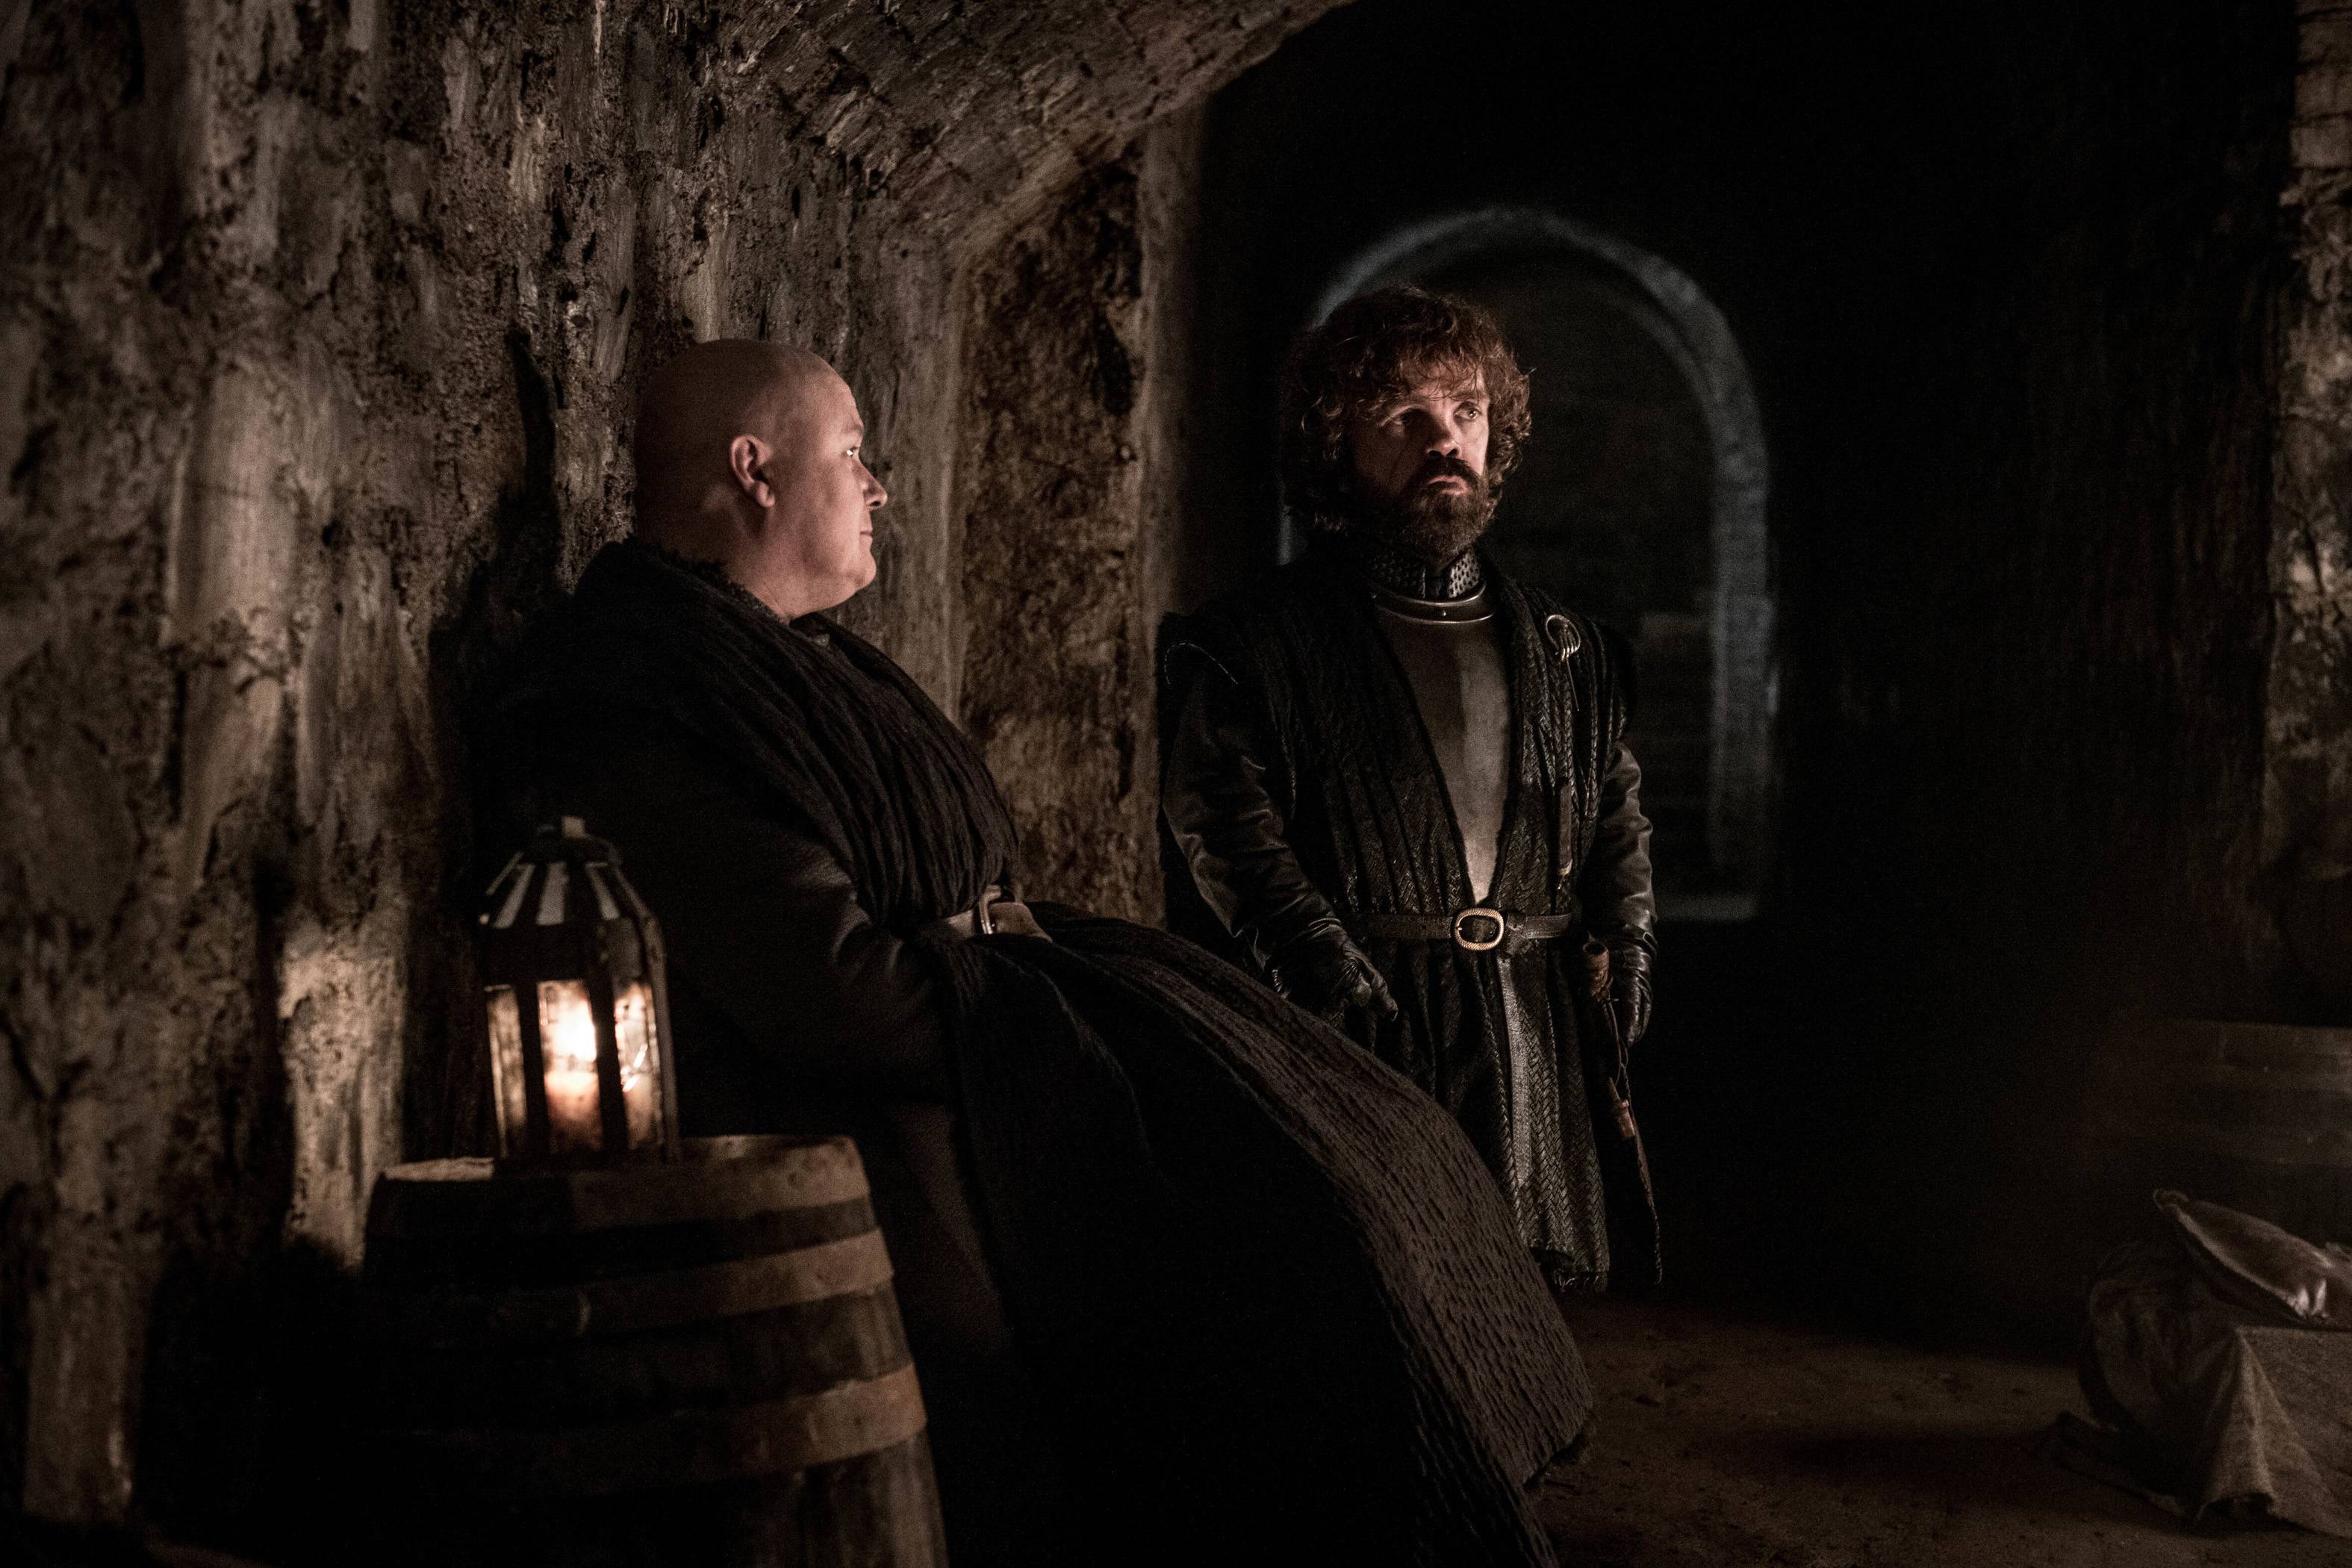 Game of Thrones Season 8 One Year Later: 'Winterfell' – Out Of Lives